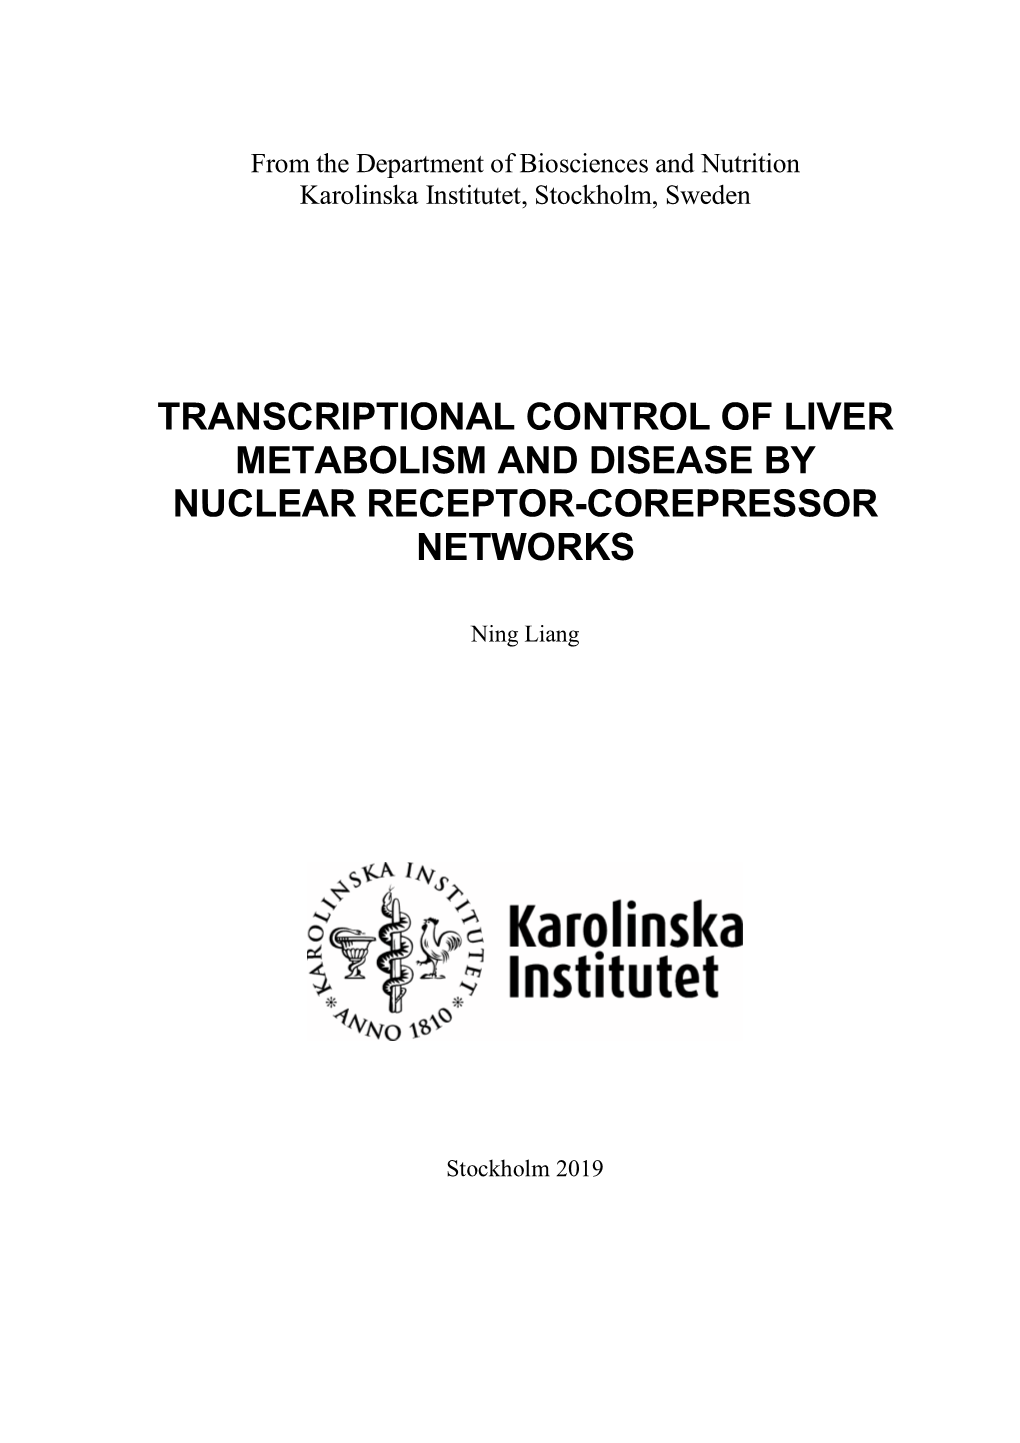 Transcriptional Control of Liver Metabolism and Disease by Nuclear Receptor-Corepressor Networks